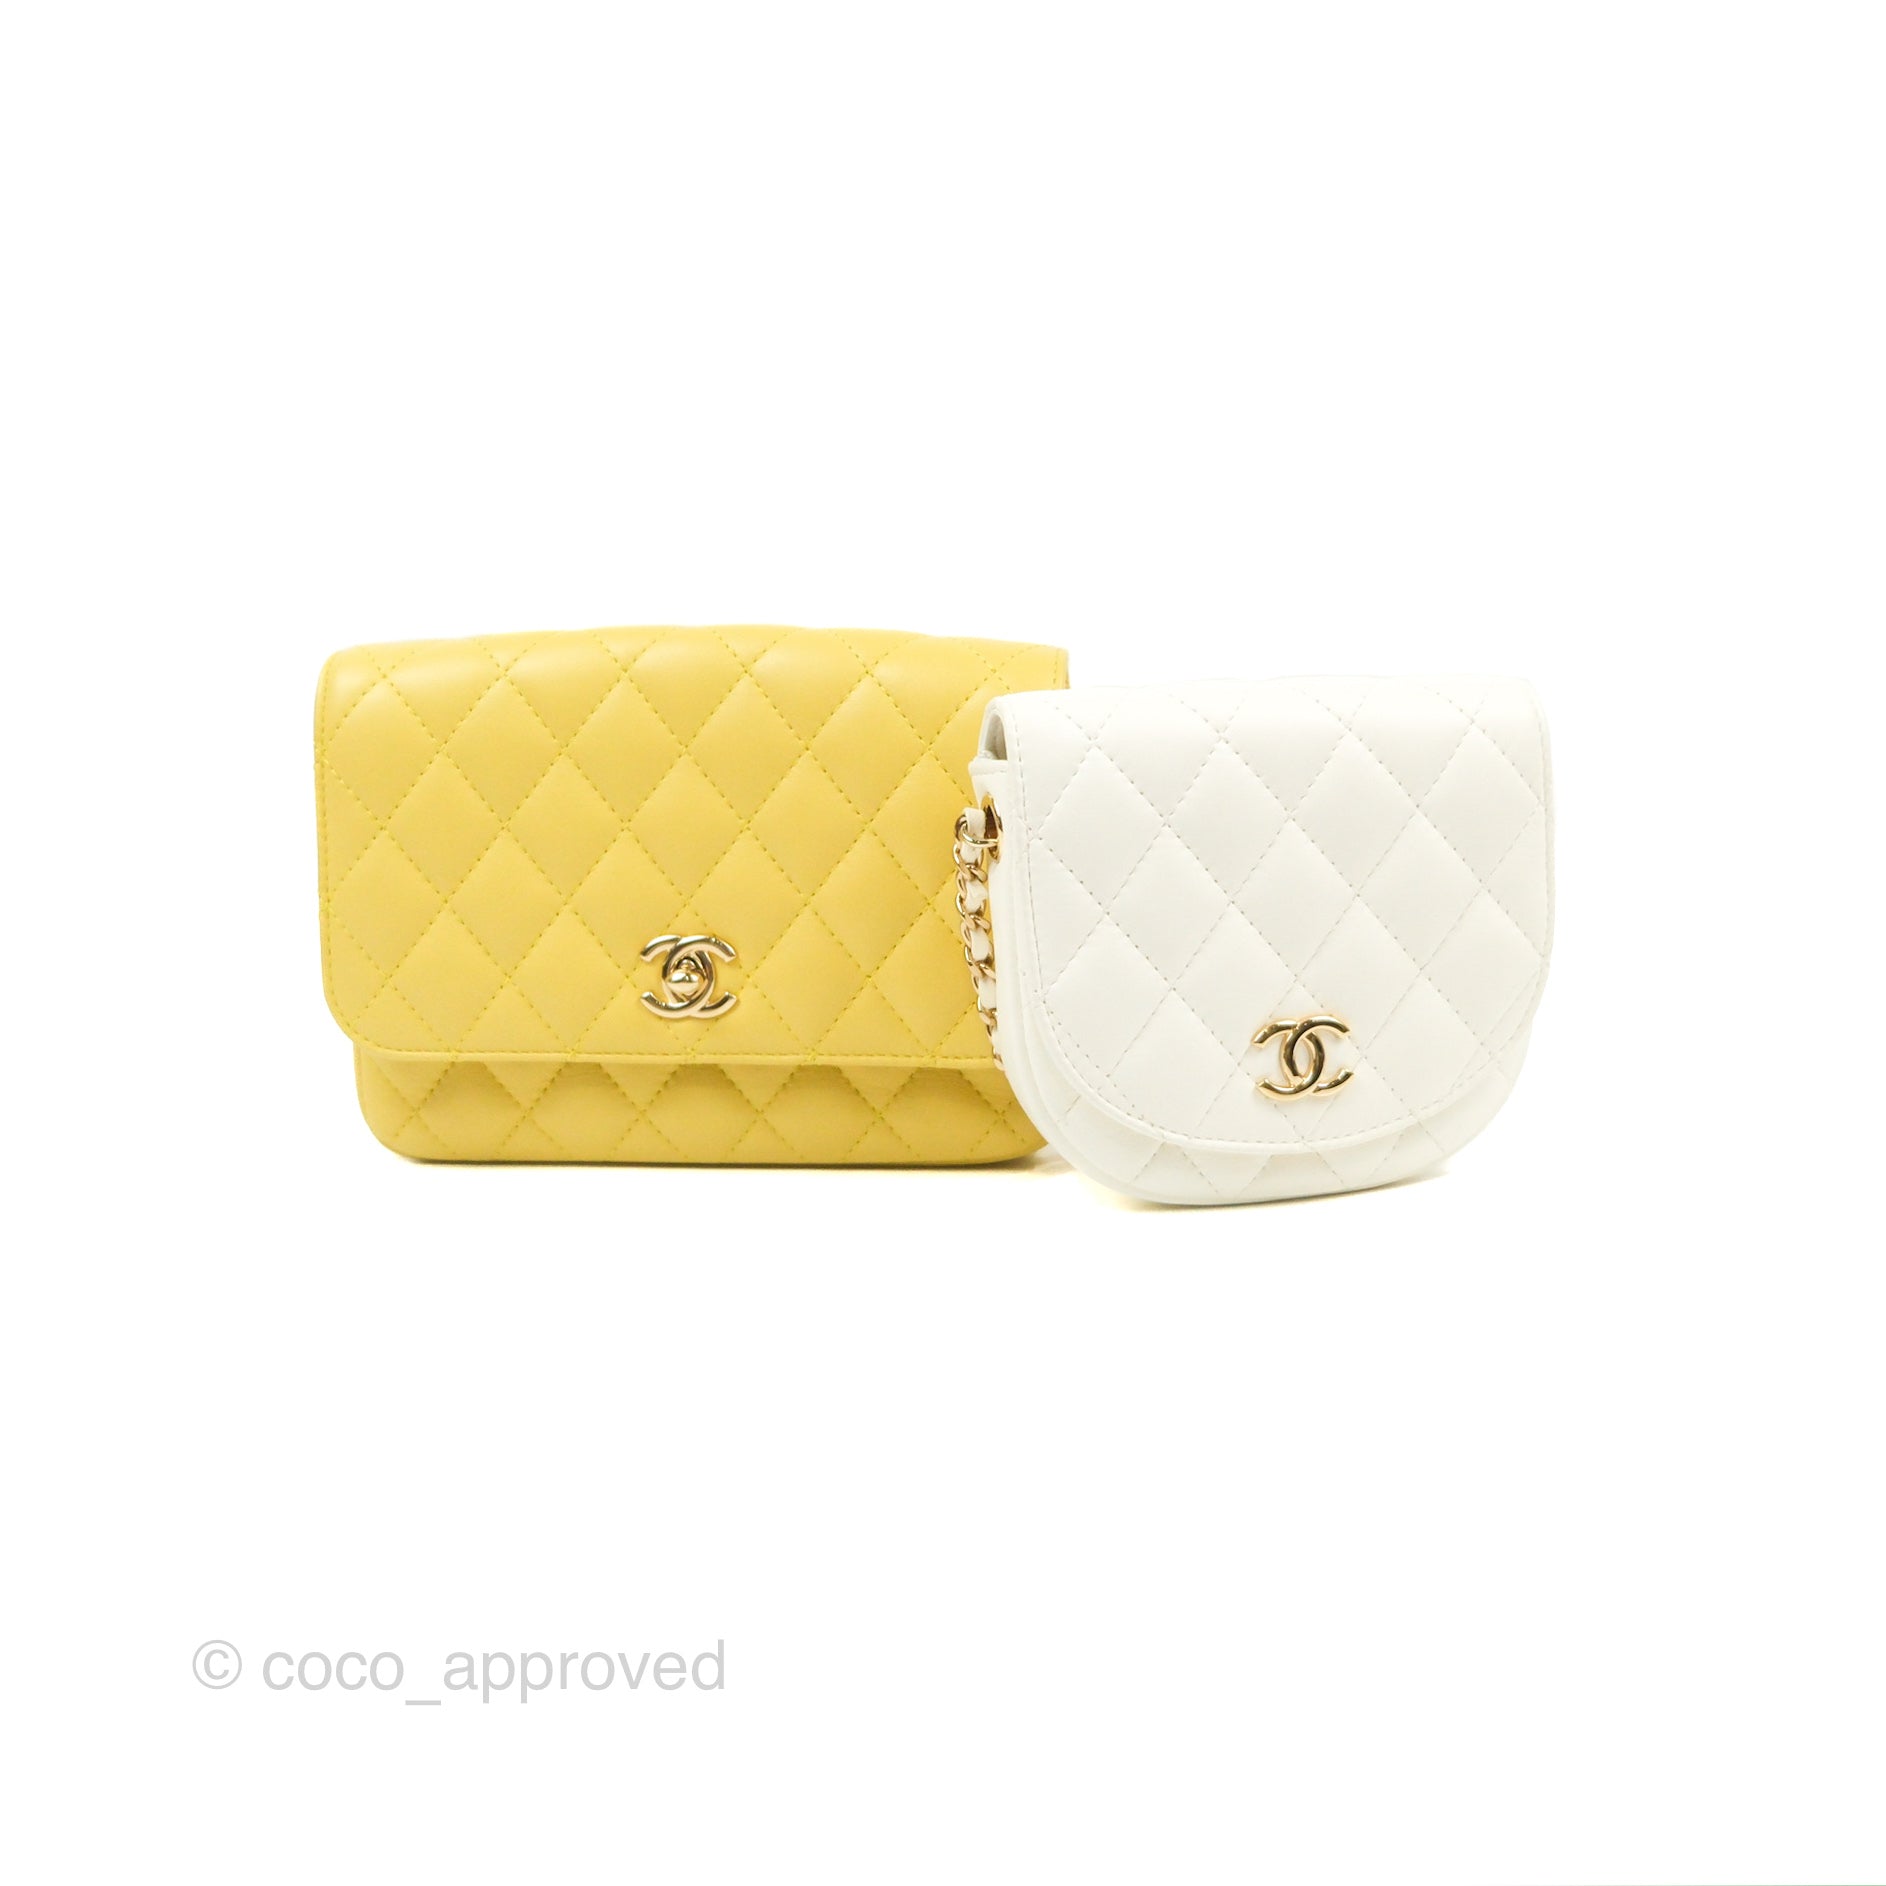 Chanel Side Packs Shoulder Bags Yellow White Lambskin Gold